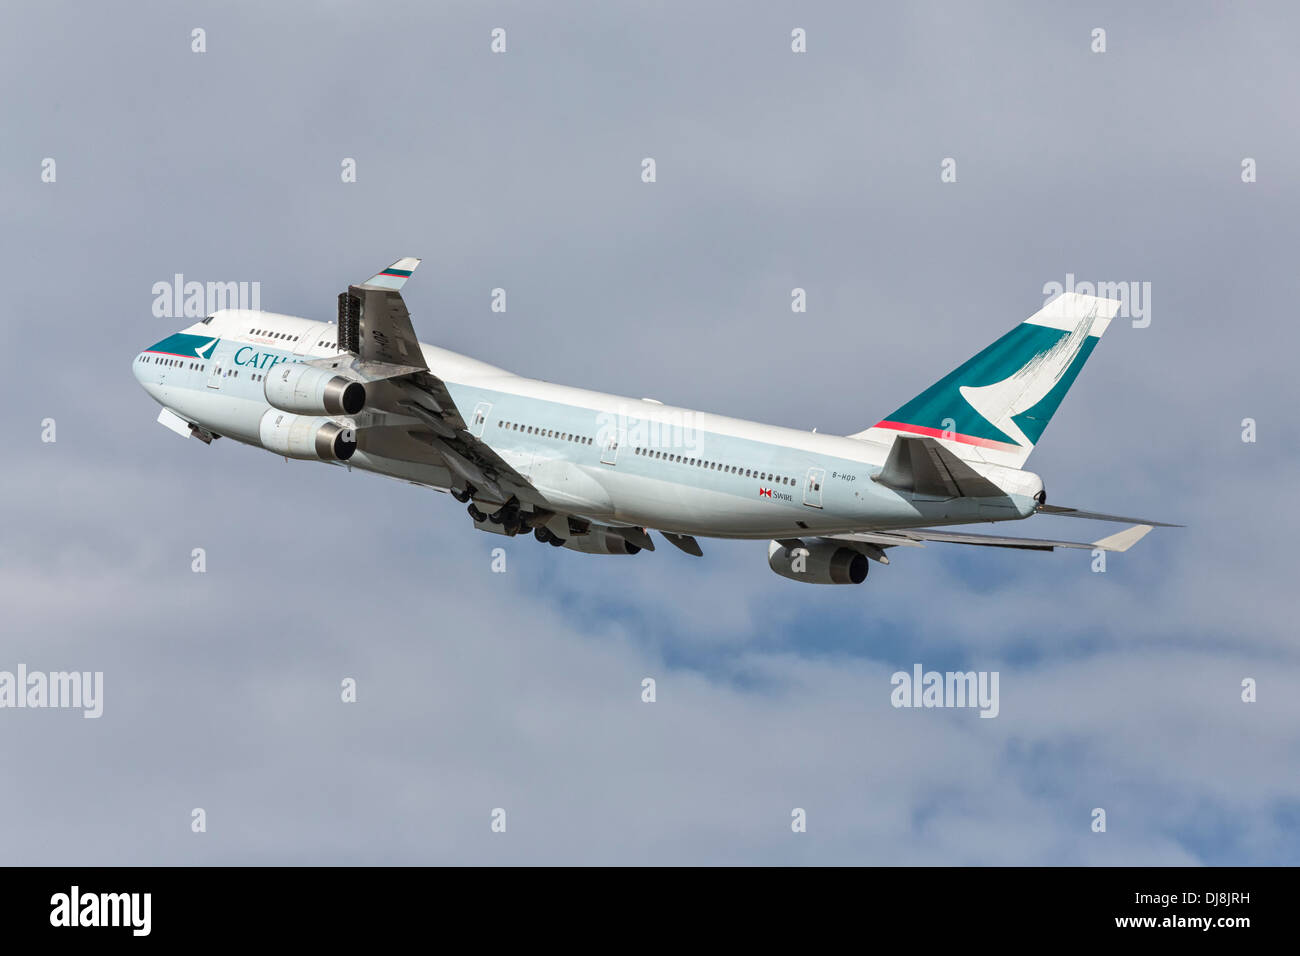 Boeing 747 of the Hong Kong airline Cathay pacific on departure Stock Photo